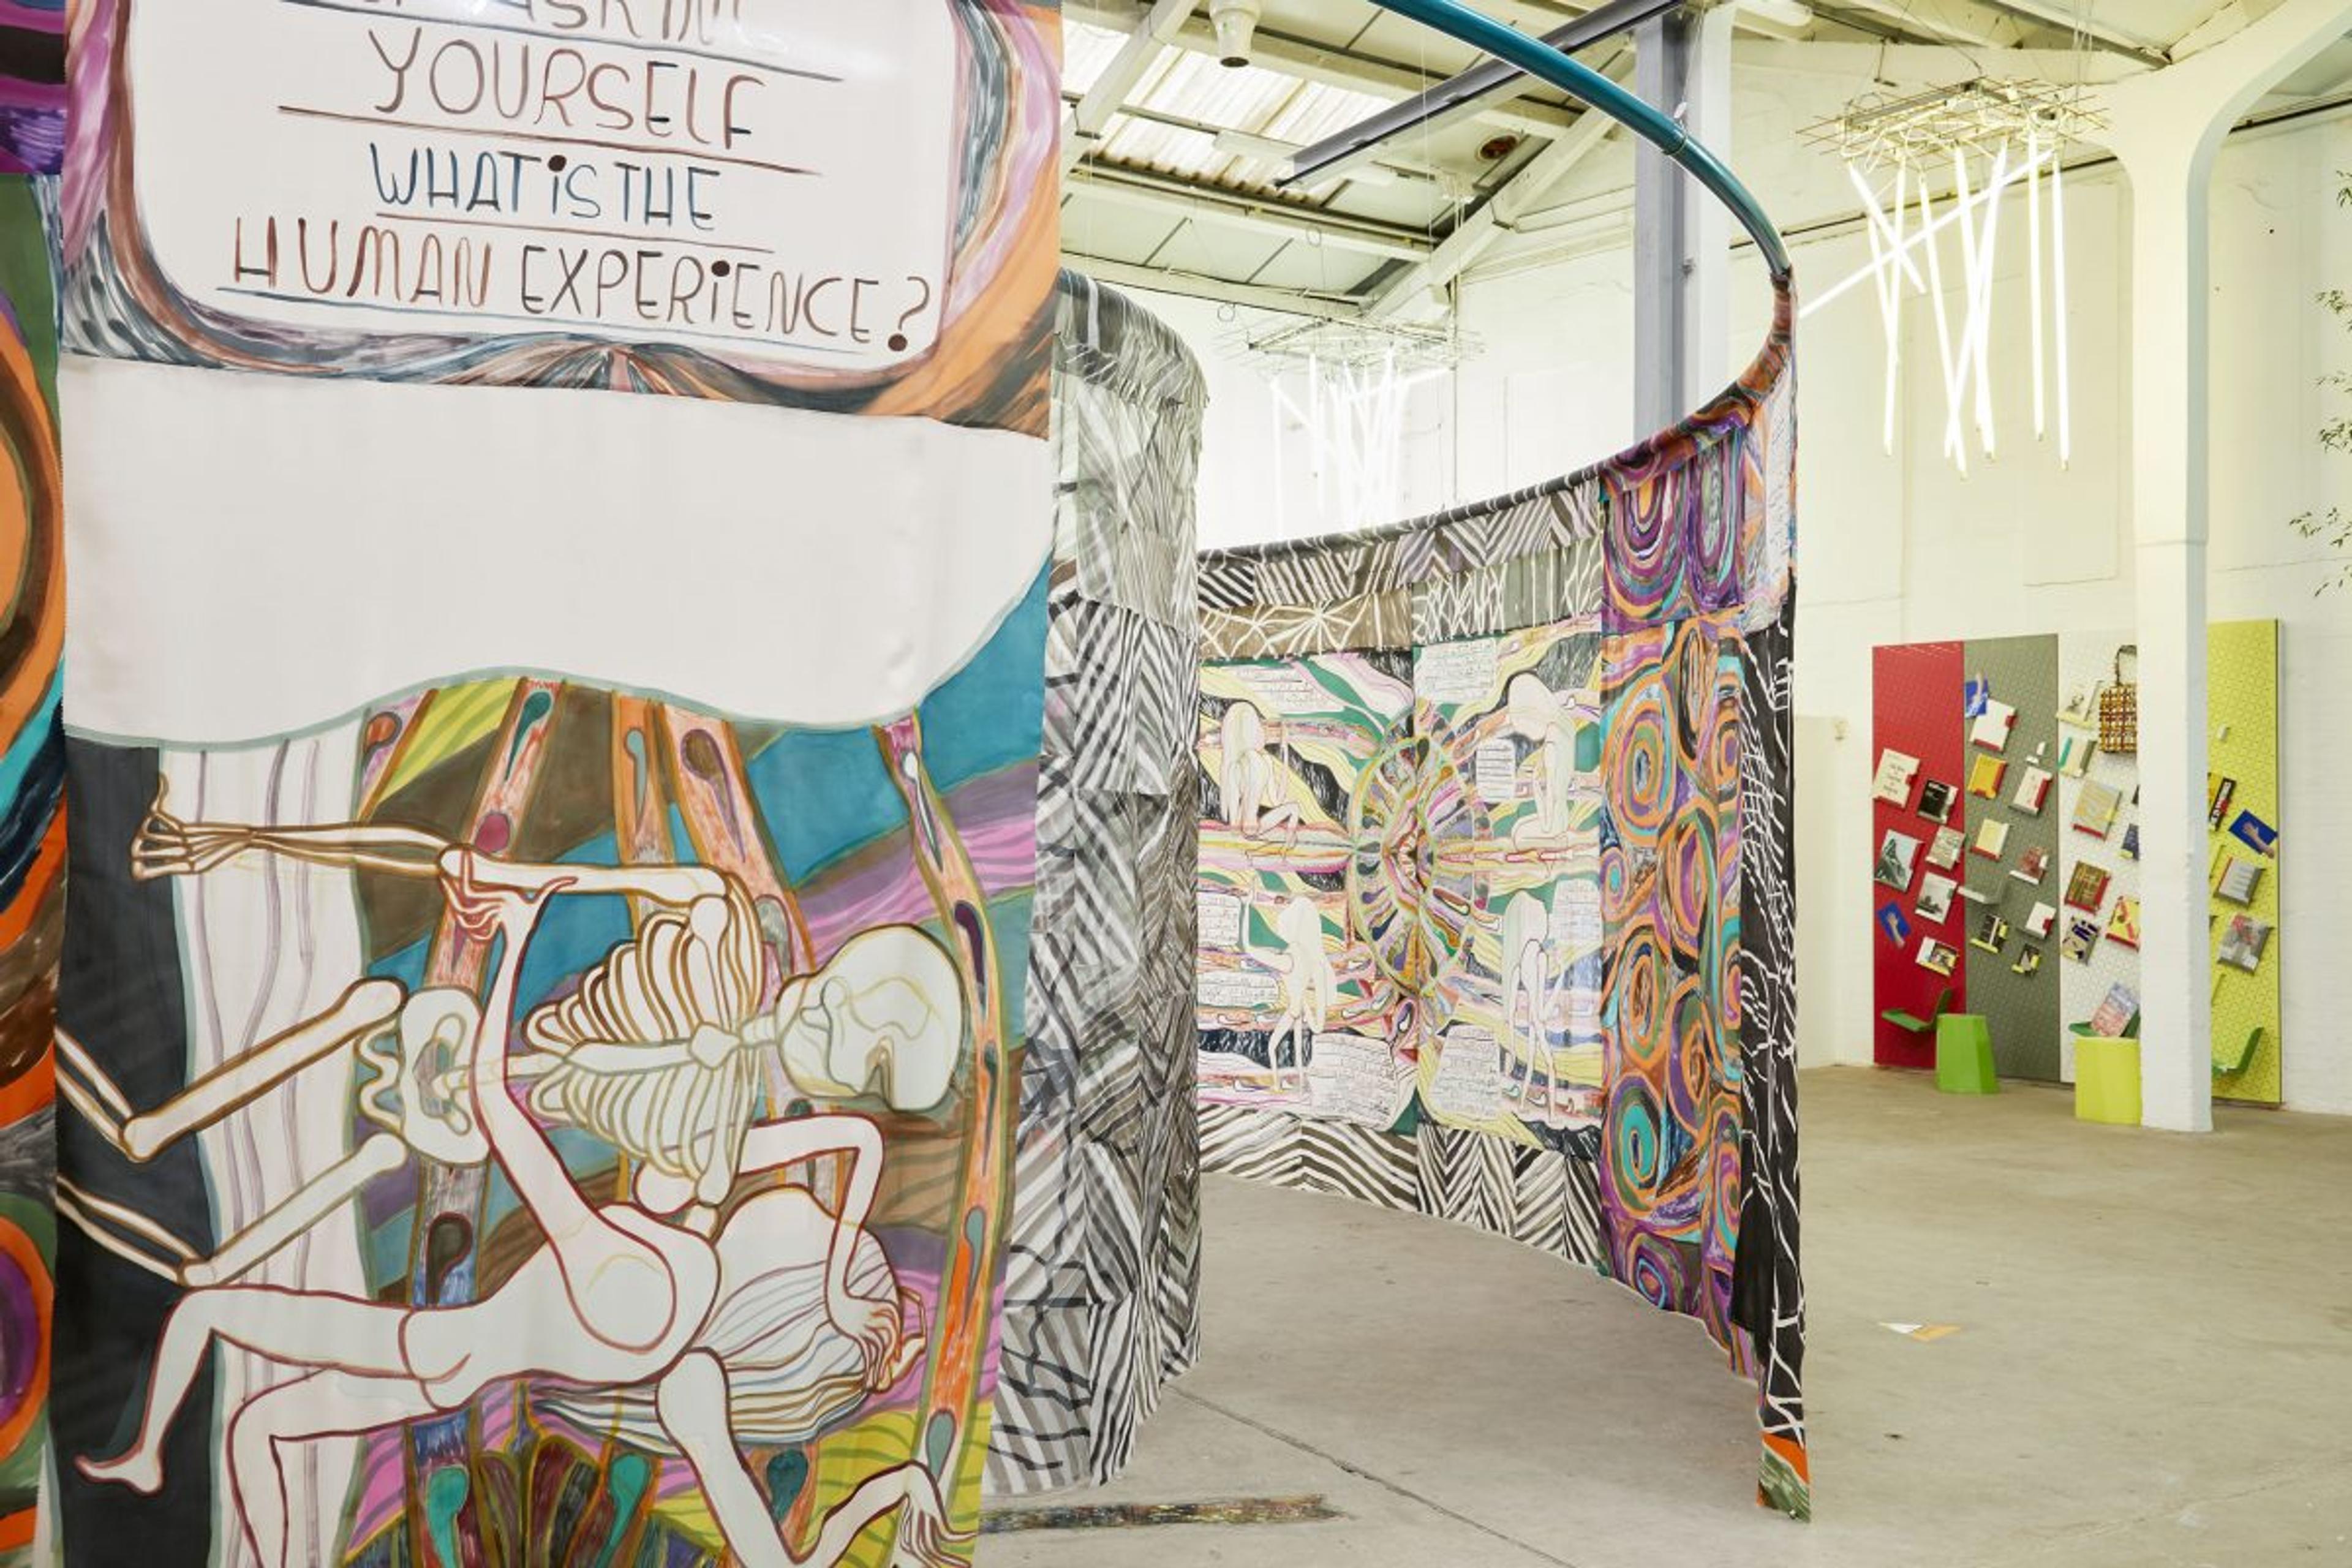 A large silk painting hands from a steel loop in the centre of Eastside Projects largest gallery. The paintings are brightly coloured and combine images, patterned panels and texts which ask questions like "What is the human experience". In the background you can see a bookcase by Martino Gamper and hanging fluorescent lights which are part of a functional artwork by Gavin Wade.